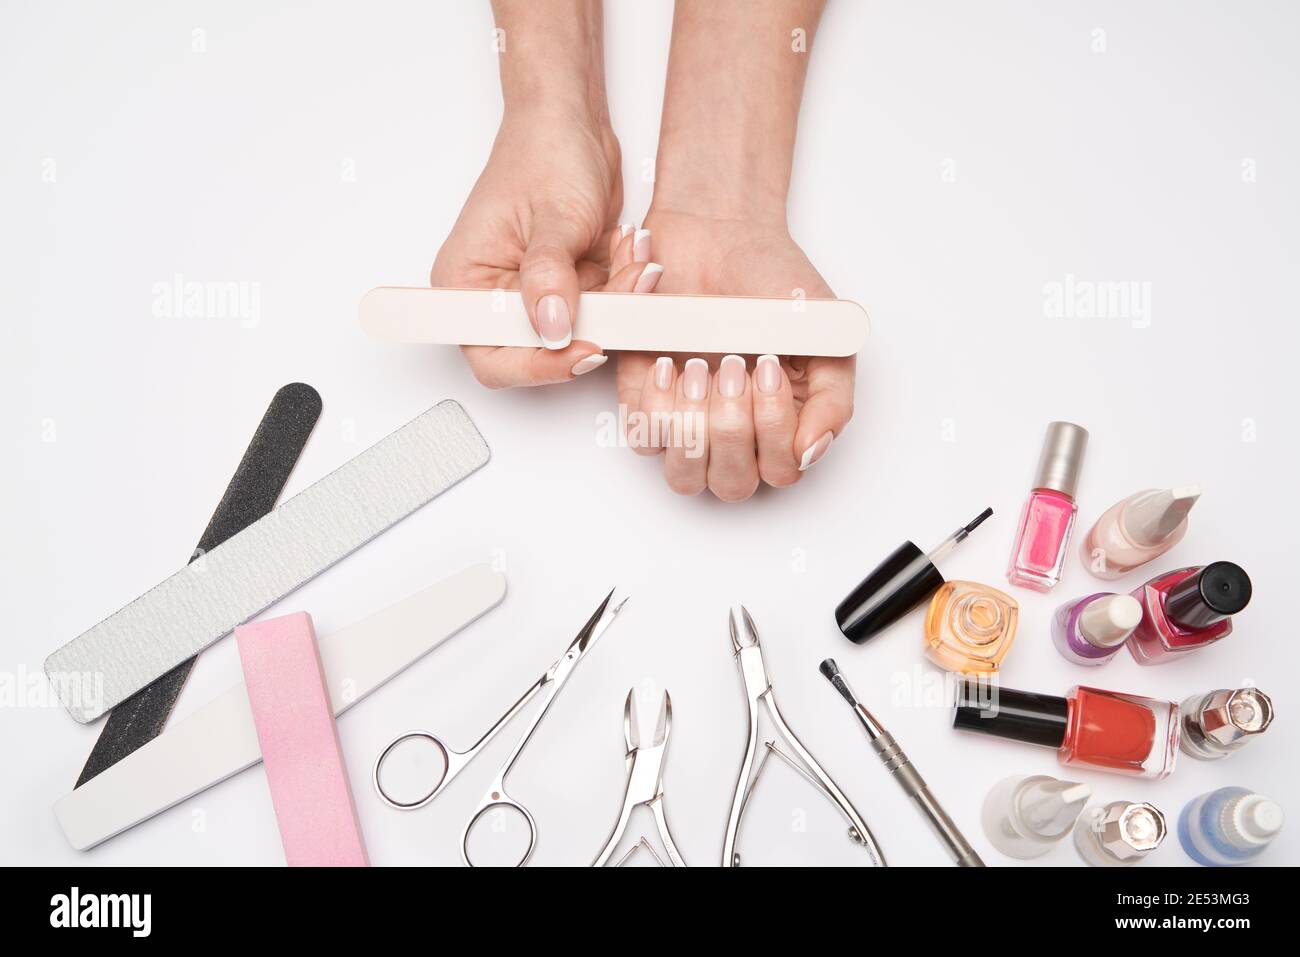 Here Are the 7 Nail Art Supplies Every Manicurist Needs | Salon Success  Academy